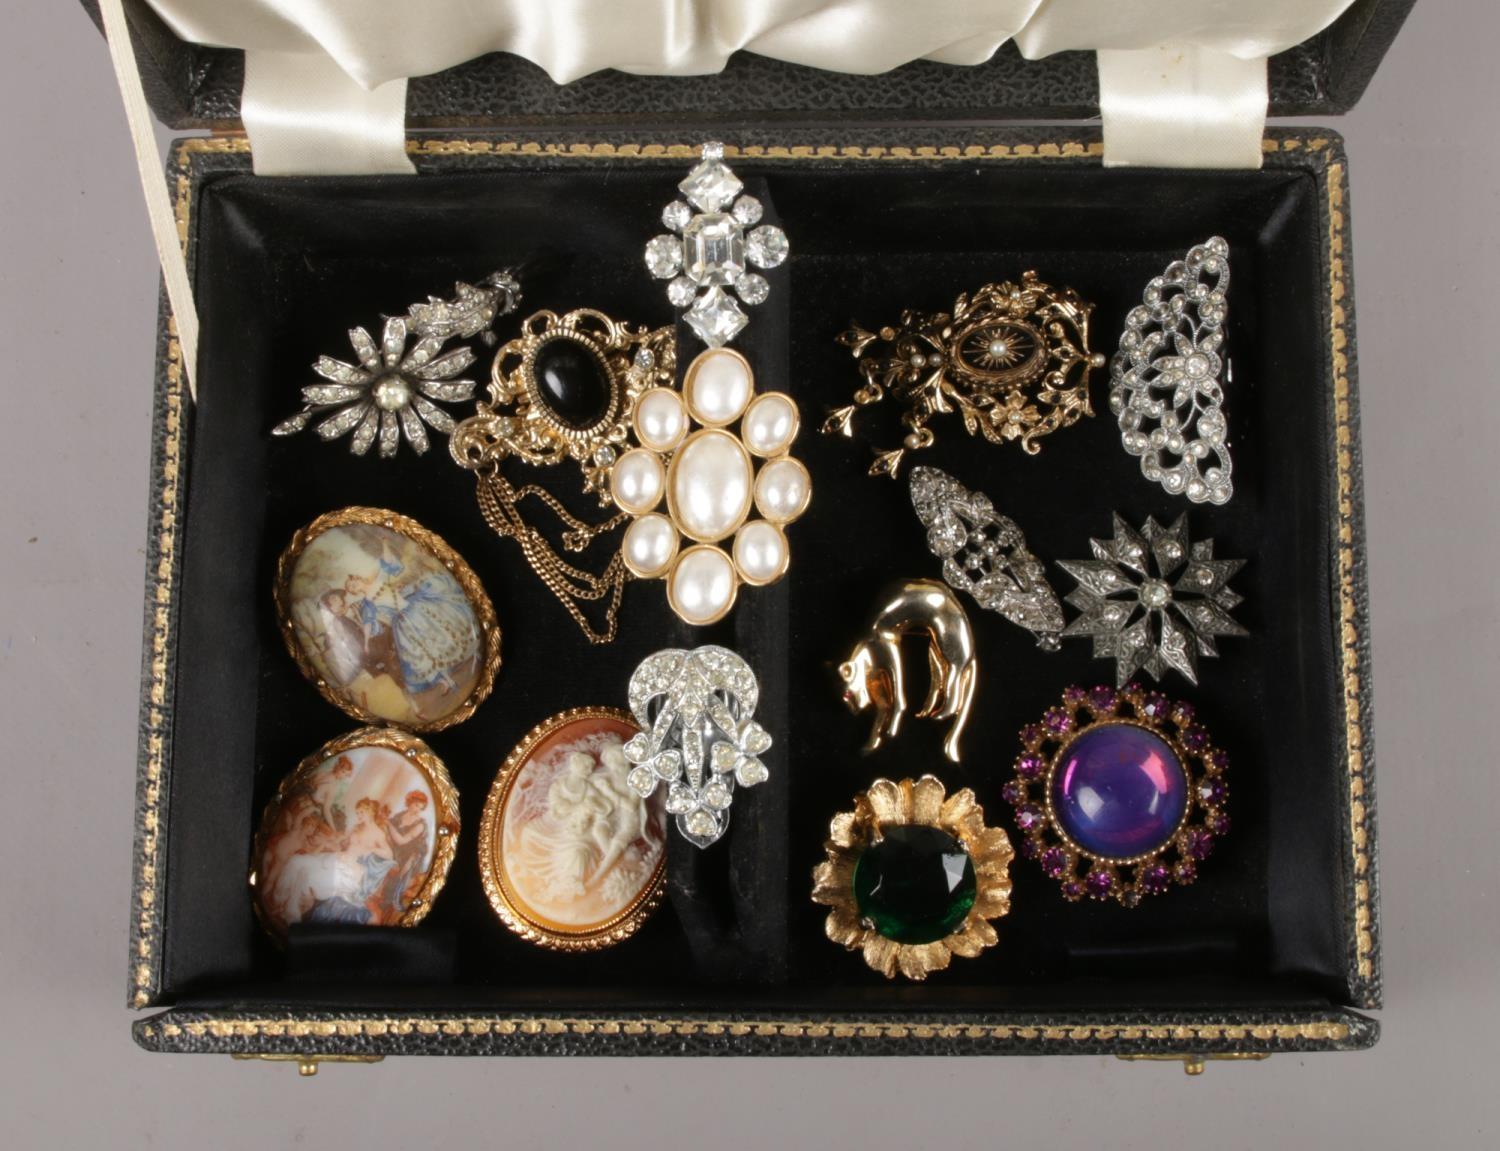 A jewellery box with contents of costume brooches, including vintage examples.